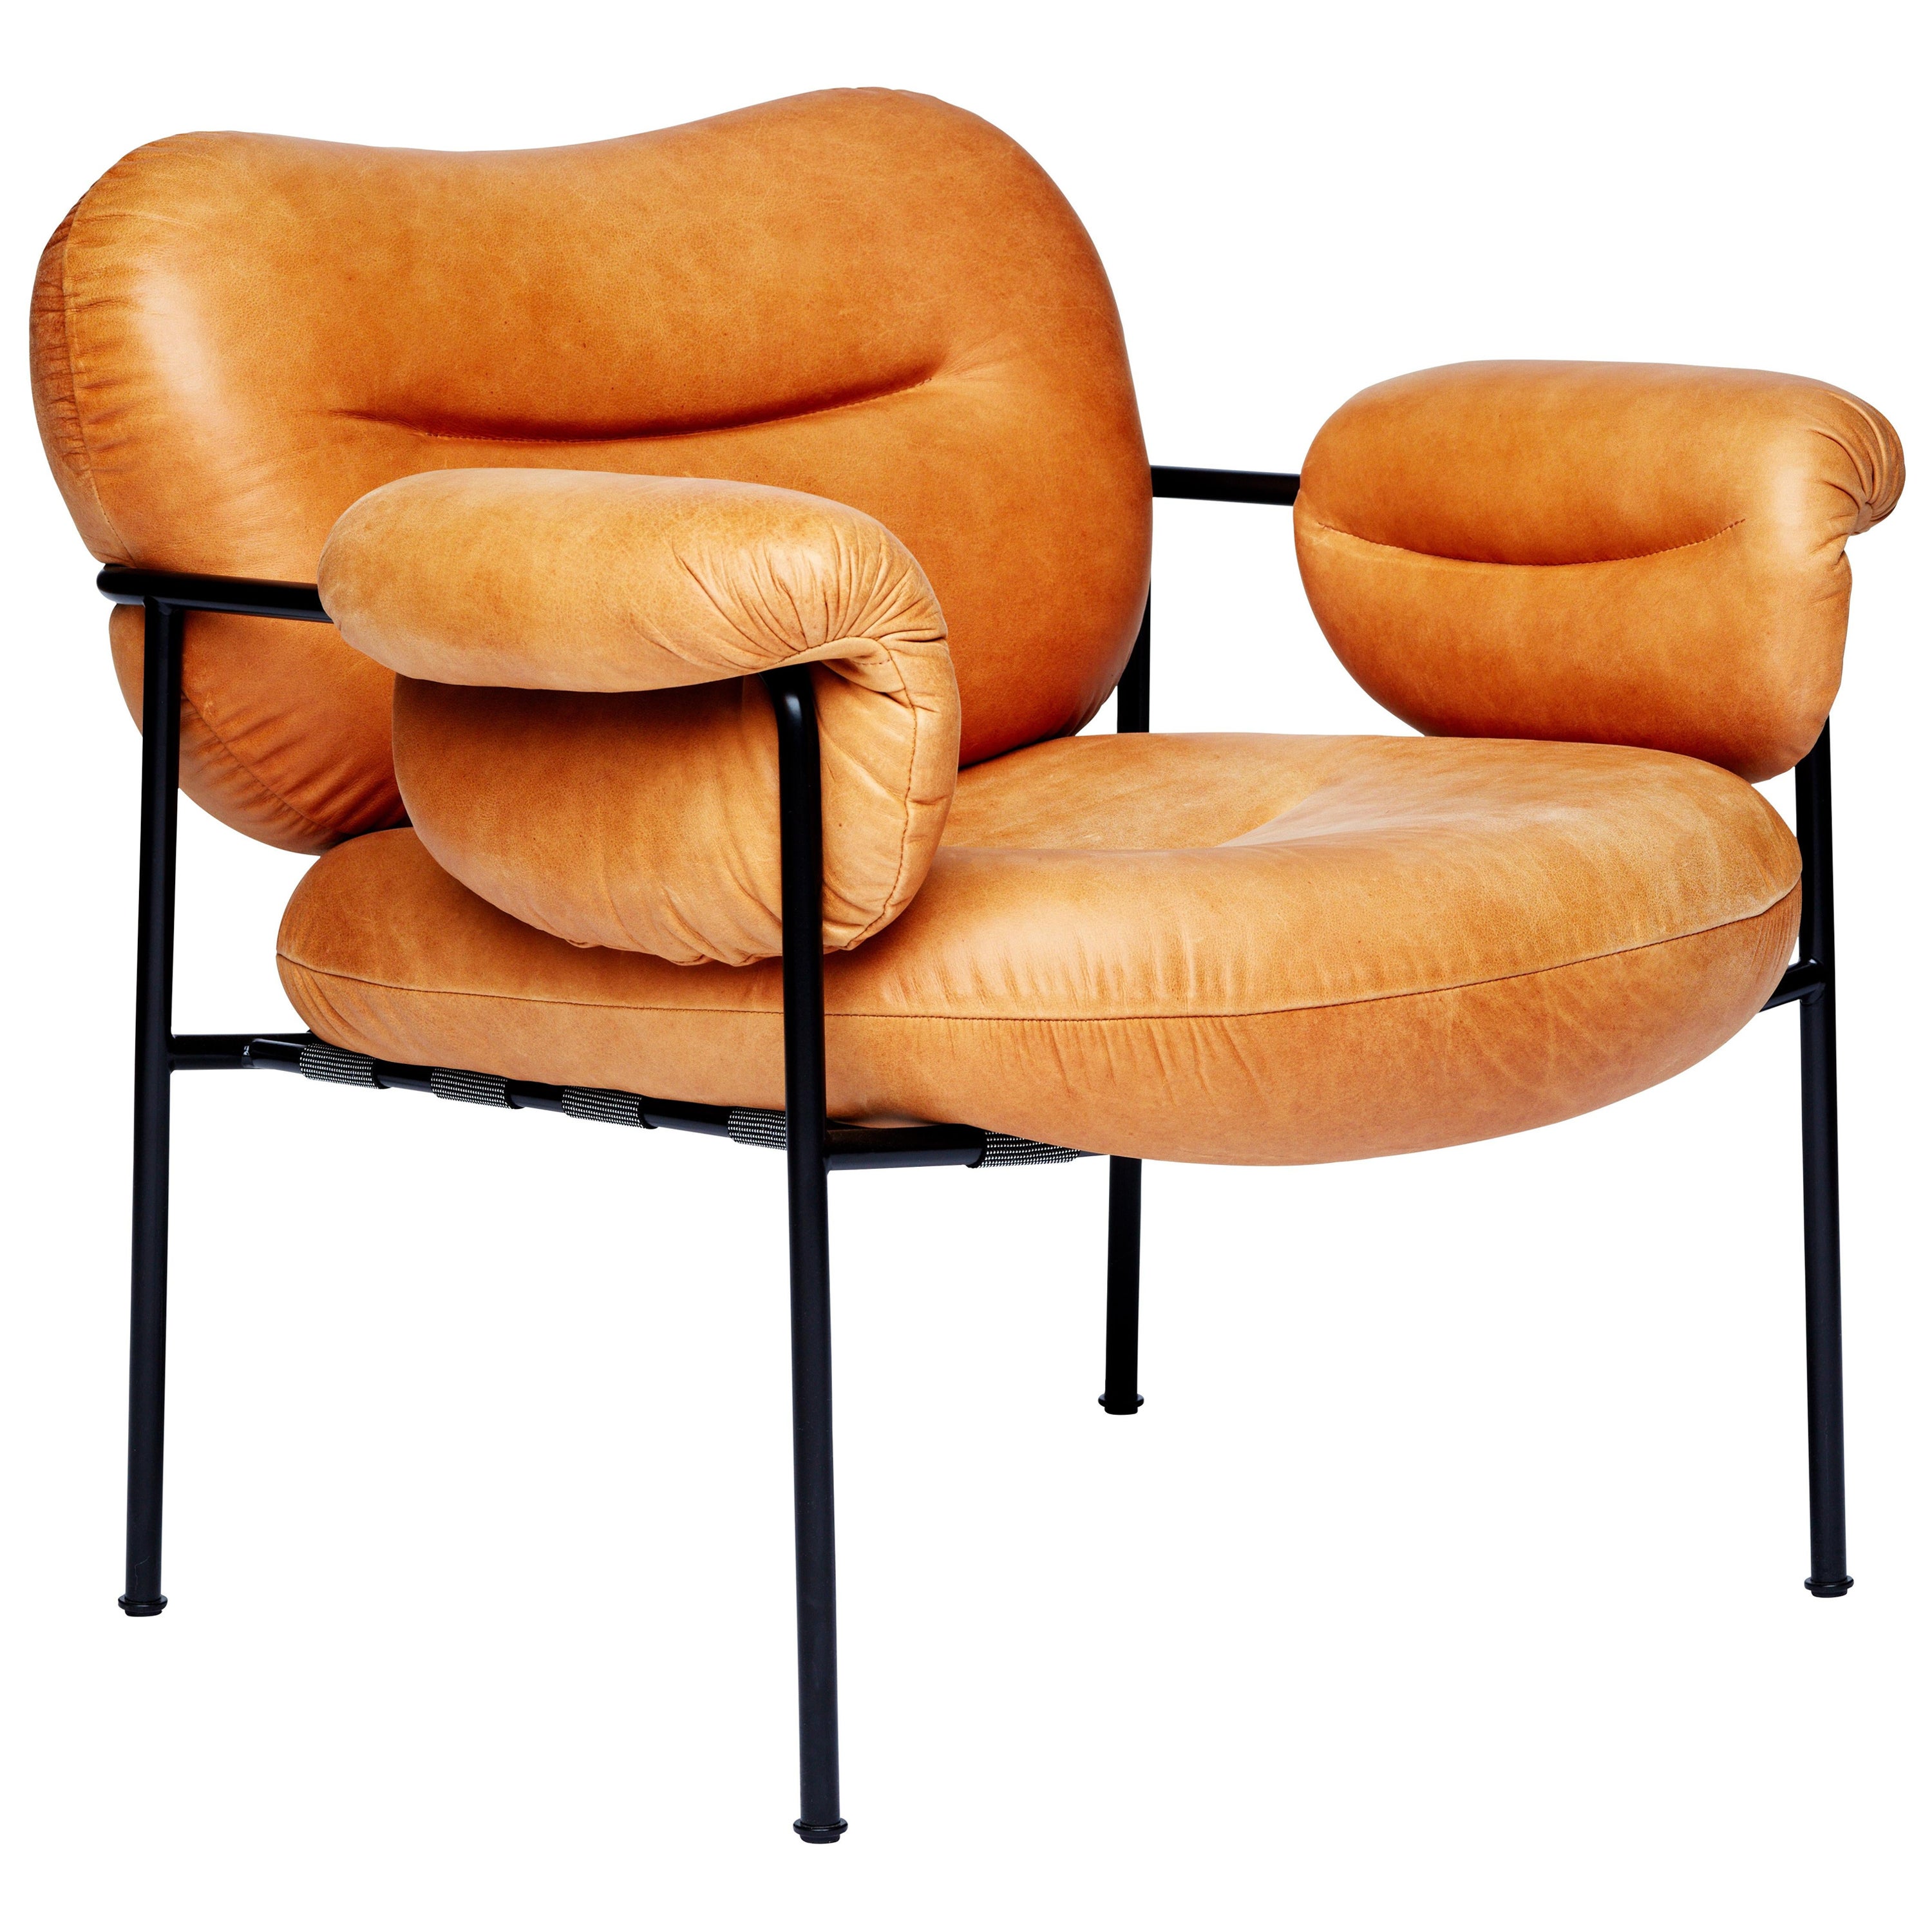 Bollo Armchair by Fogia, Cognac Leather, Black Steel For Sale